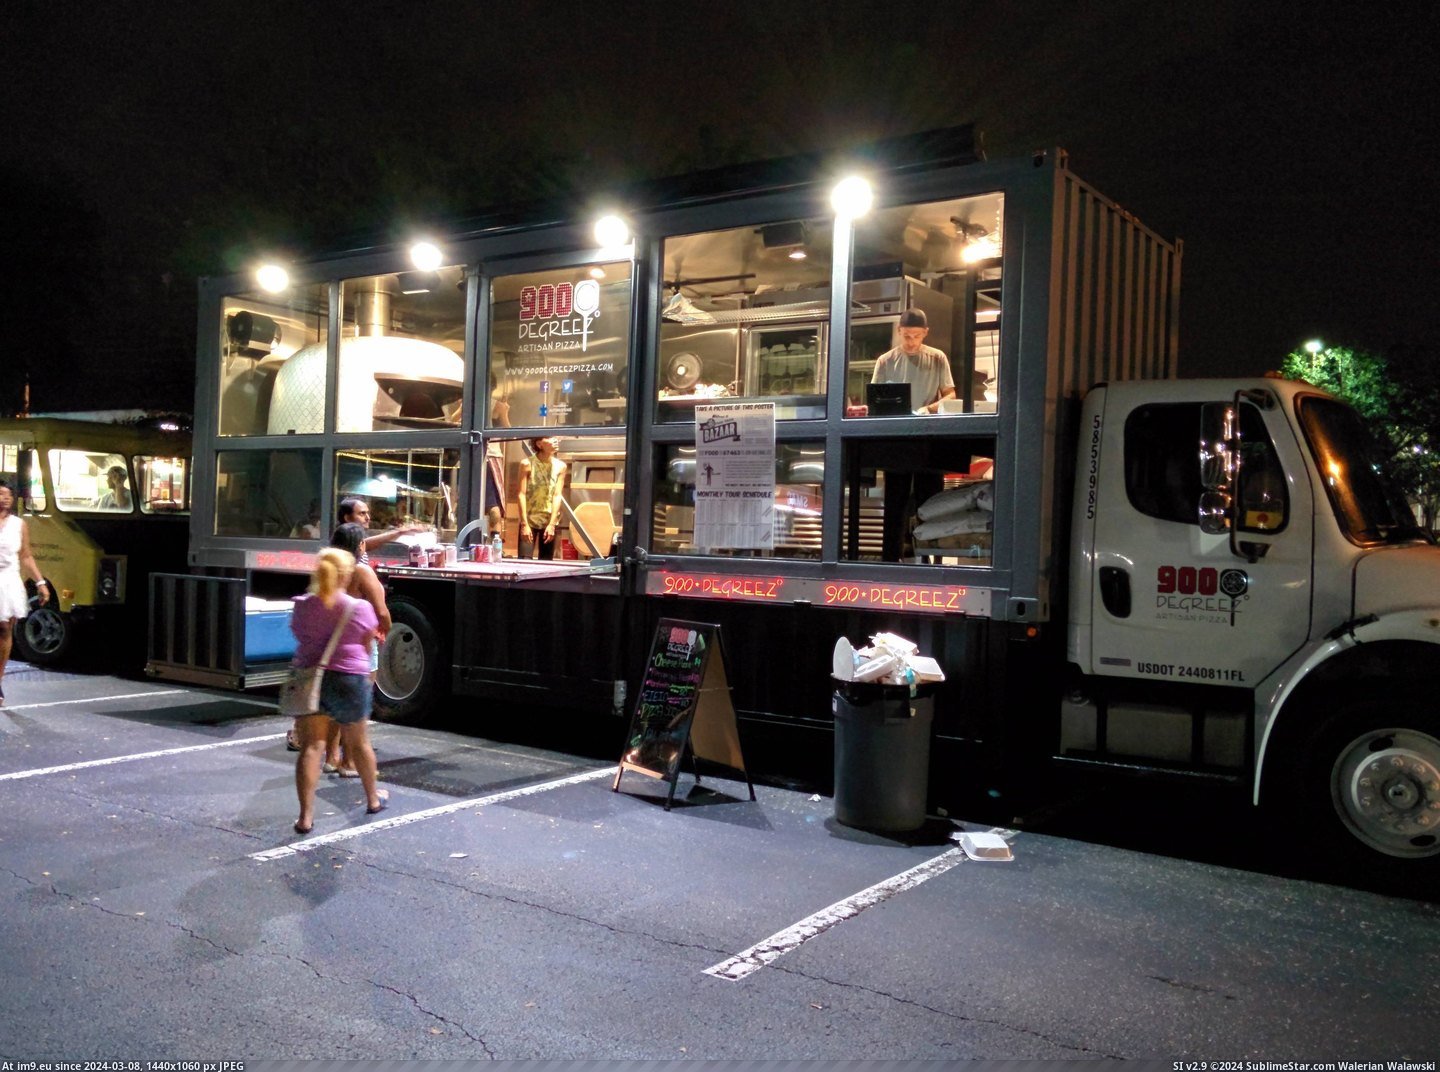 #Storage #Food #Italian #Truck #Level #Fired #Parlor #Oven #Foot #Wood #Pound #Pizza [Pics] Next level food truck: pizza parlor inside a 35 foot storage truck containing a 3500 pound Italian wood-fired oven that c Pic. (Image of album My r/PICS favs))